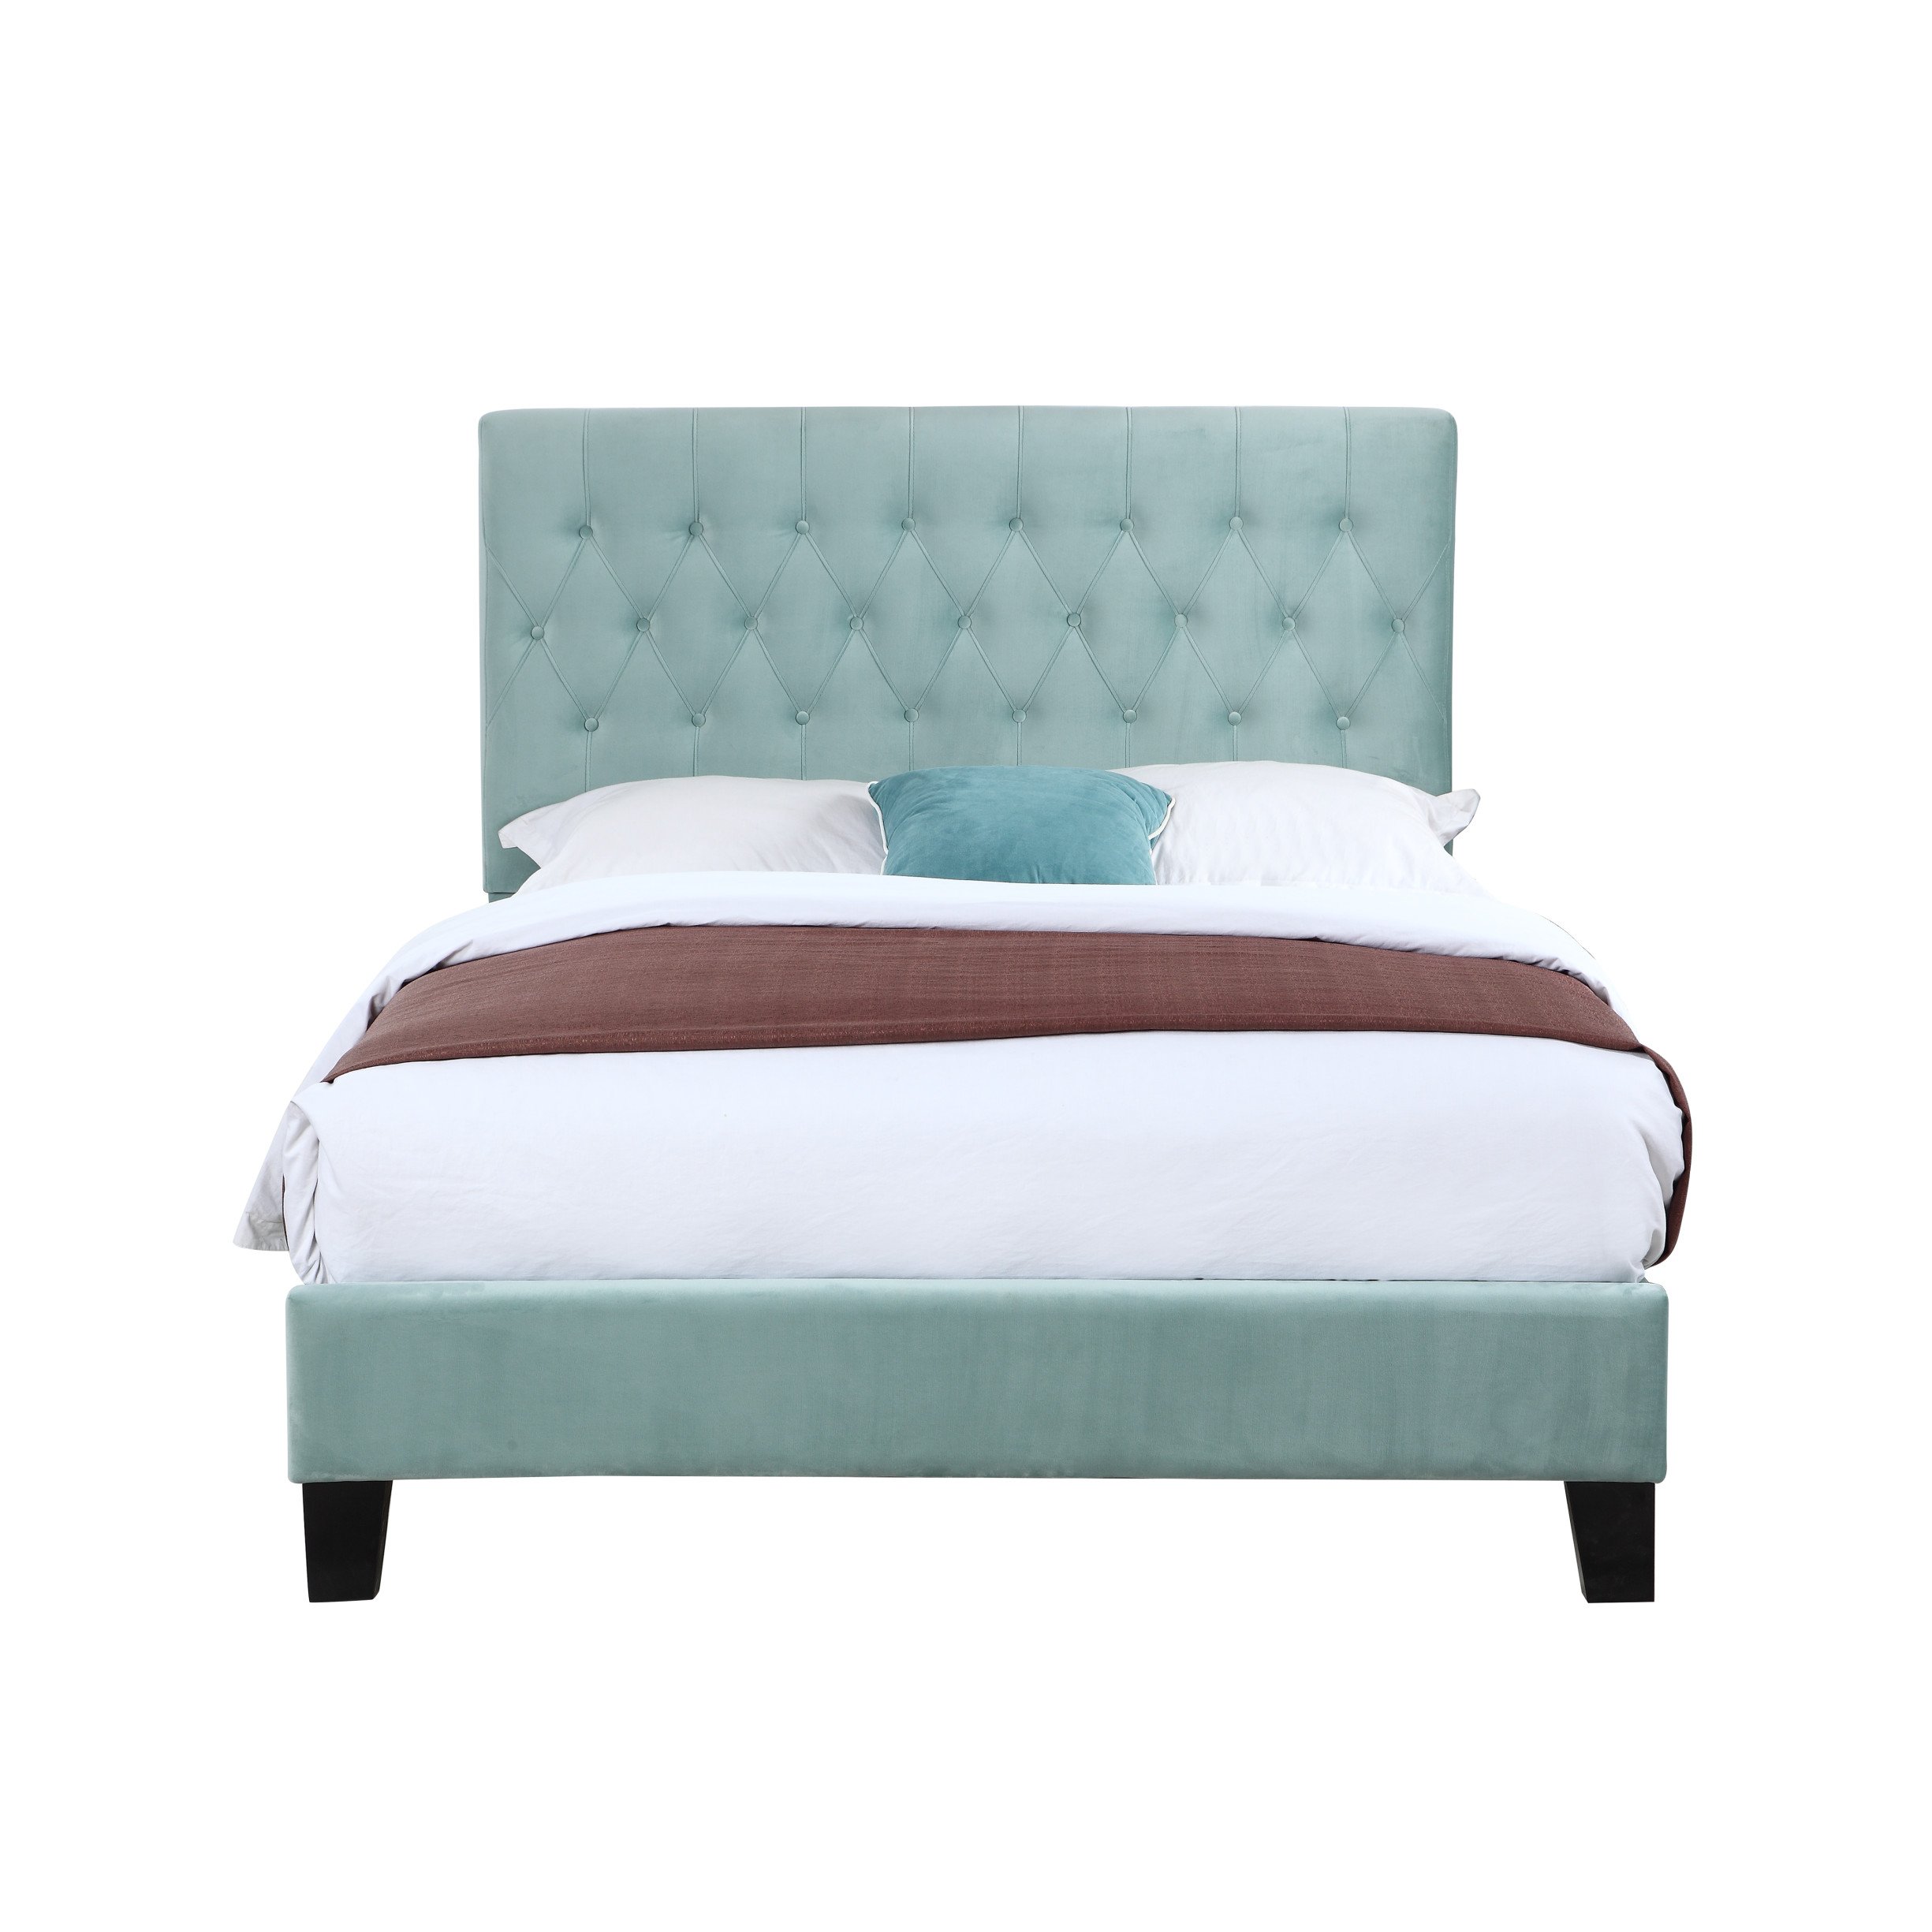 Book Cover Artum Hill Upholstered Bed With Tufted, Padded Headboard, And Platform-Style Base Twin Aqua Velvet